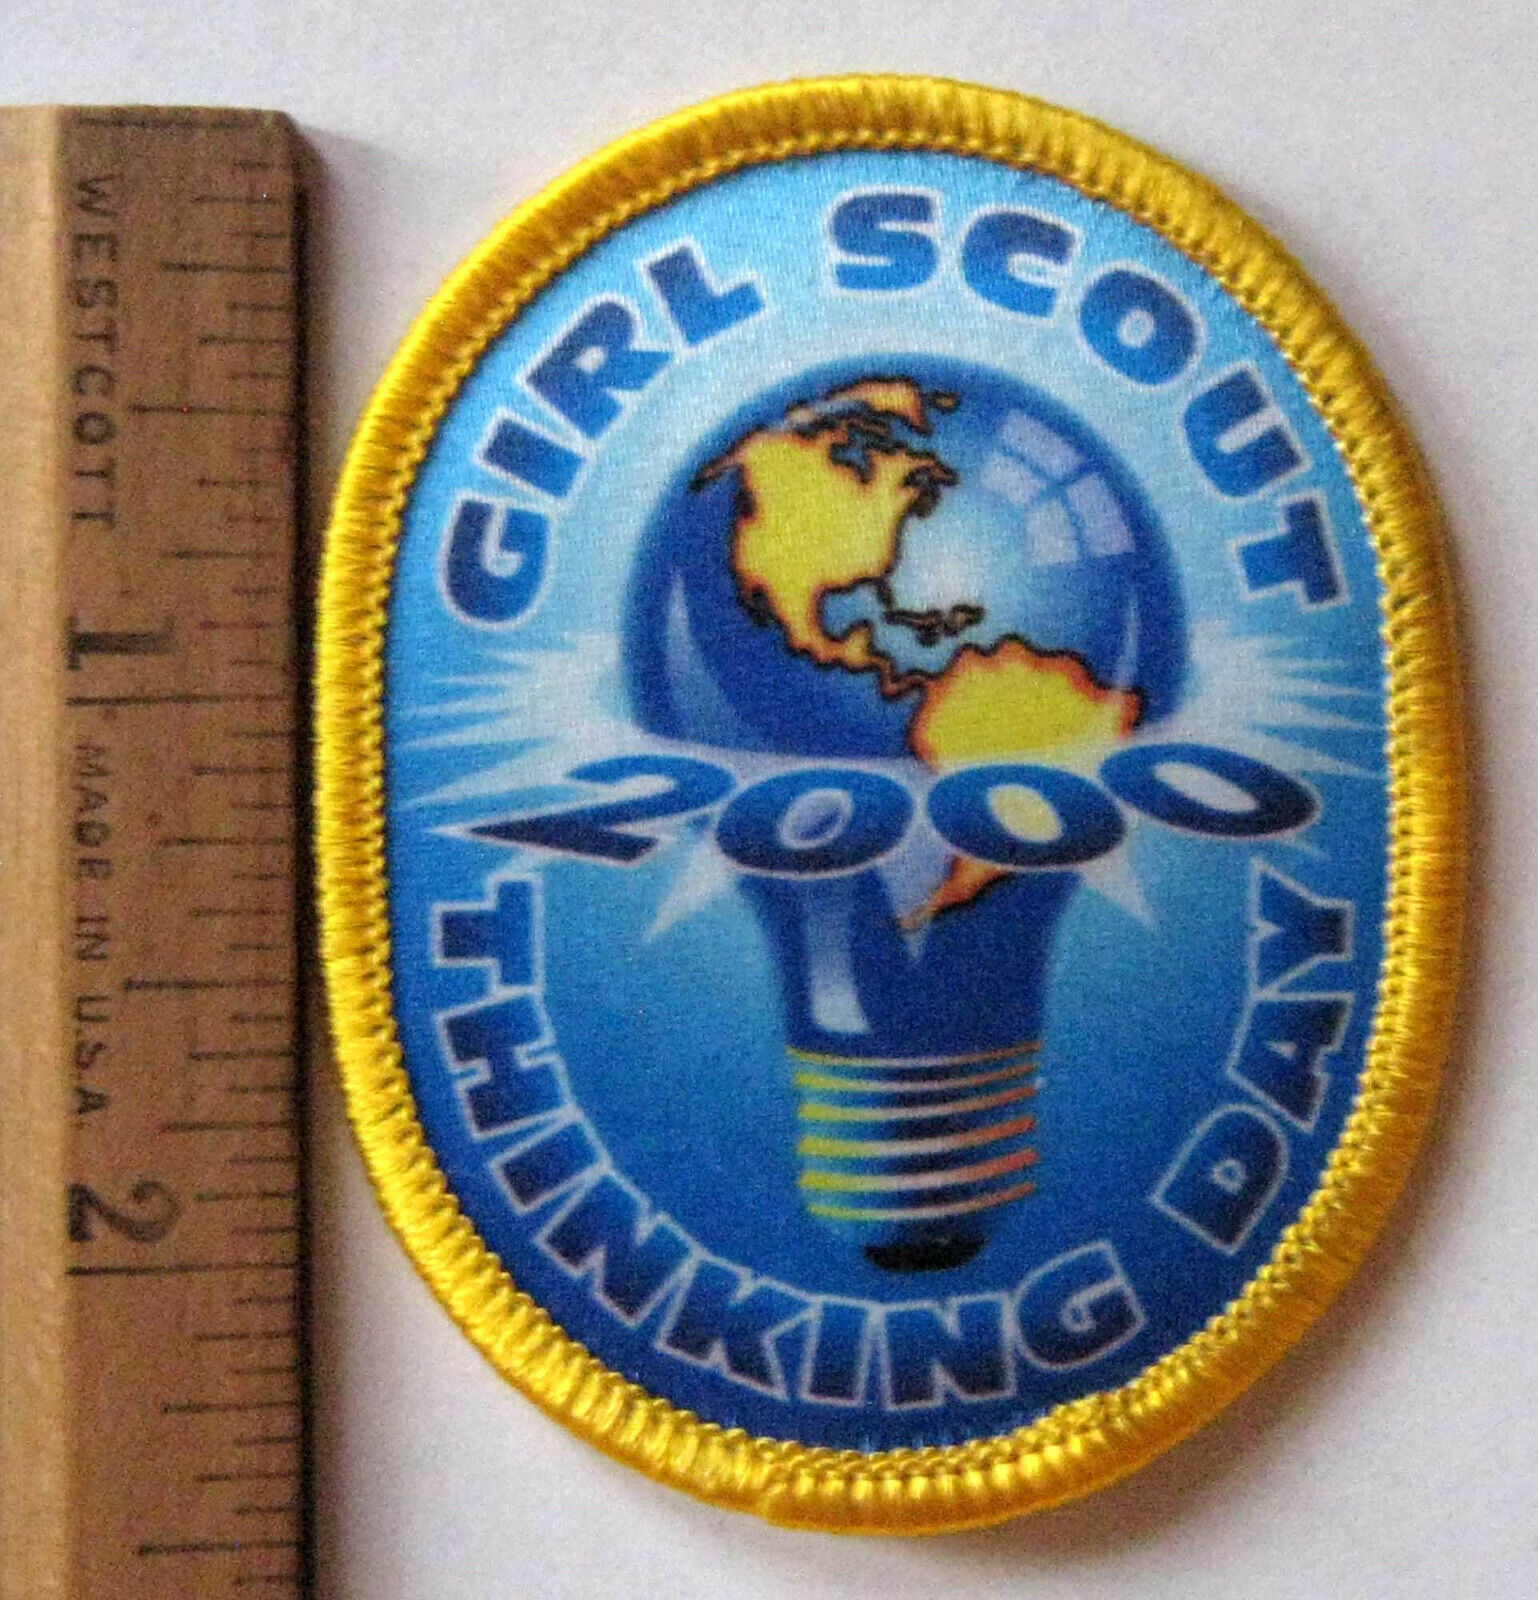  Girl Scout THINKING DAY 2000 PATCH Lightbulb Globe NEW World Friendship Badge